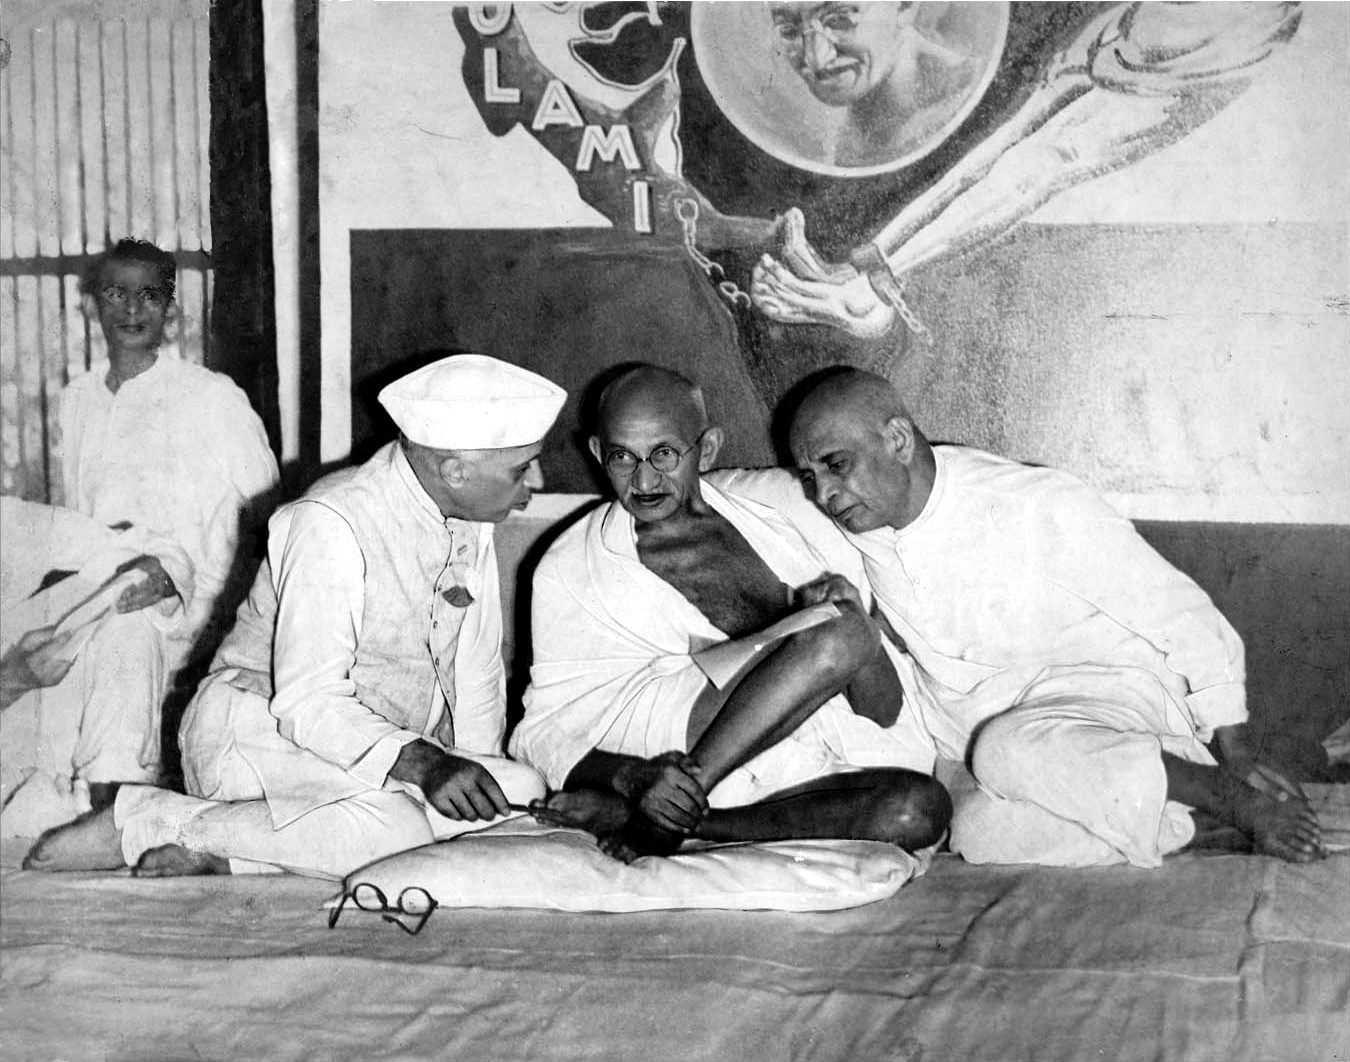 SARDAR PATEL – THE GREAT CAPTAIN WITH A MIND OF STEEL AND VISION